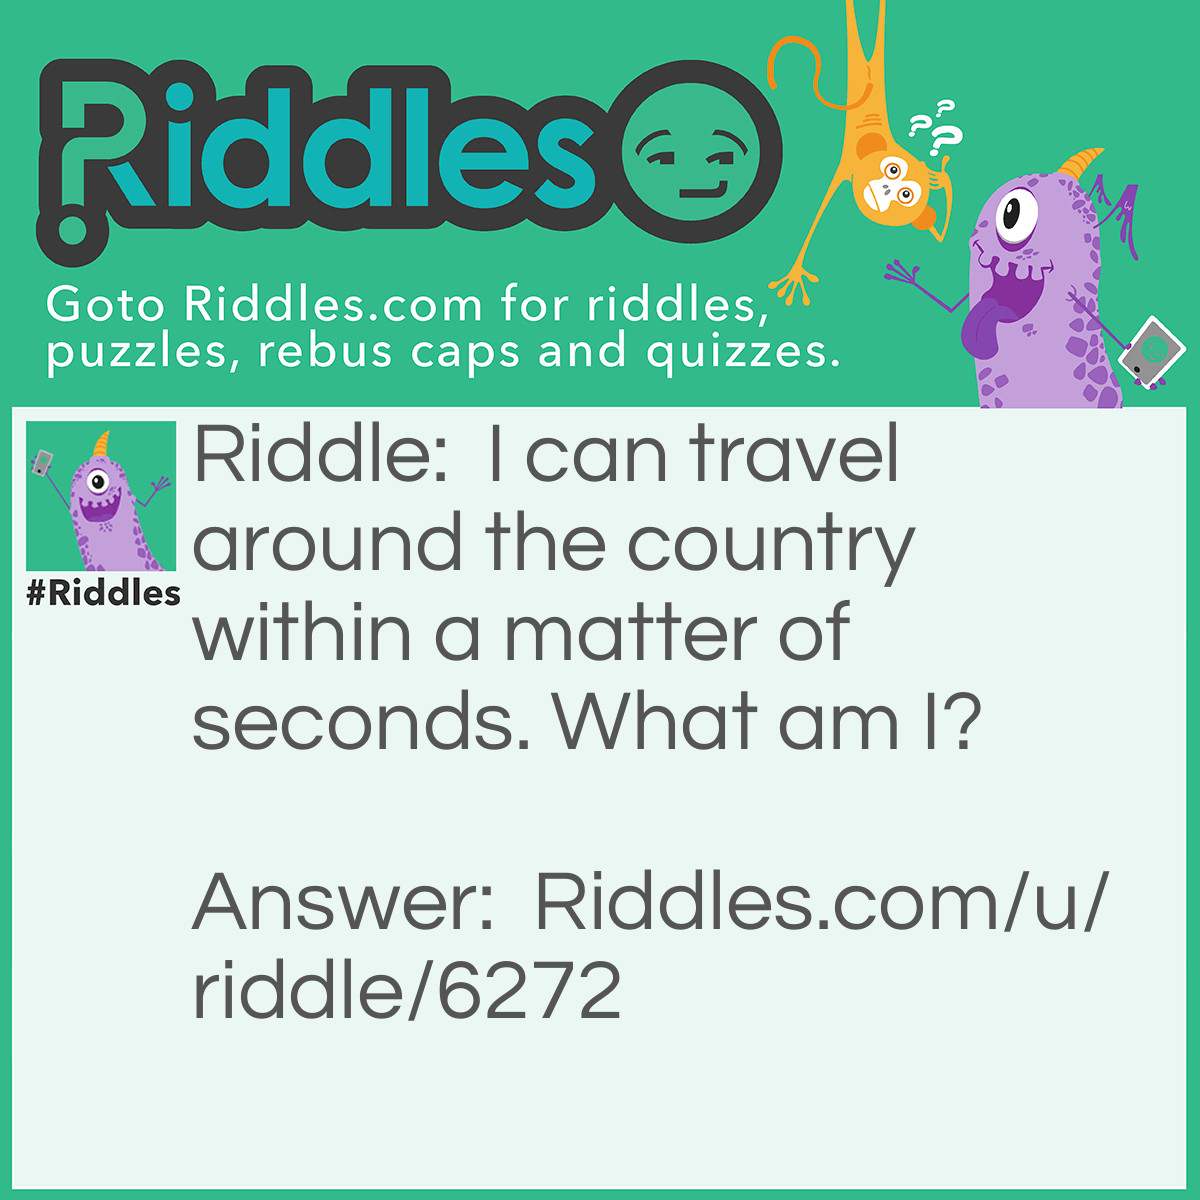 Riddle: I can travel around the country within a matter of seconds. What am I? Answer: Road.